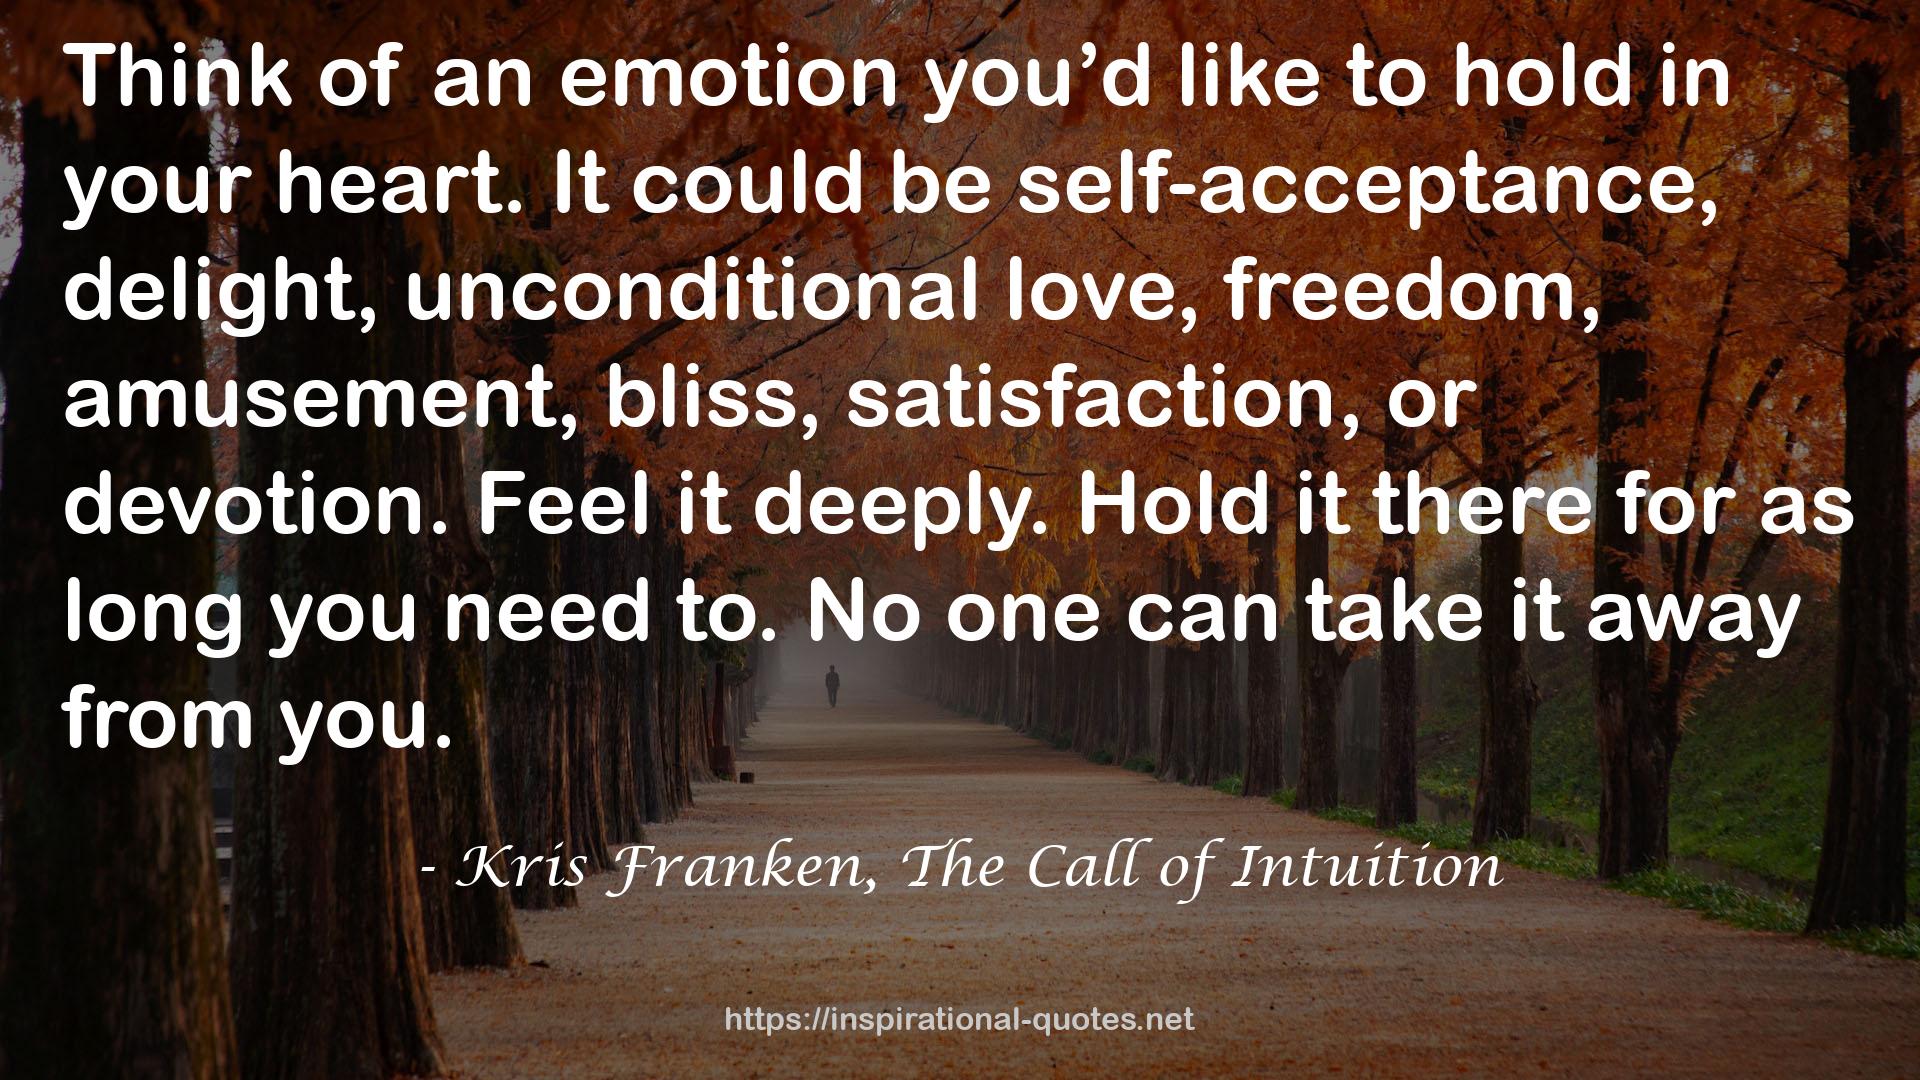 Kris Franken, The Call of Intuition QUOTES